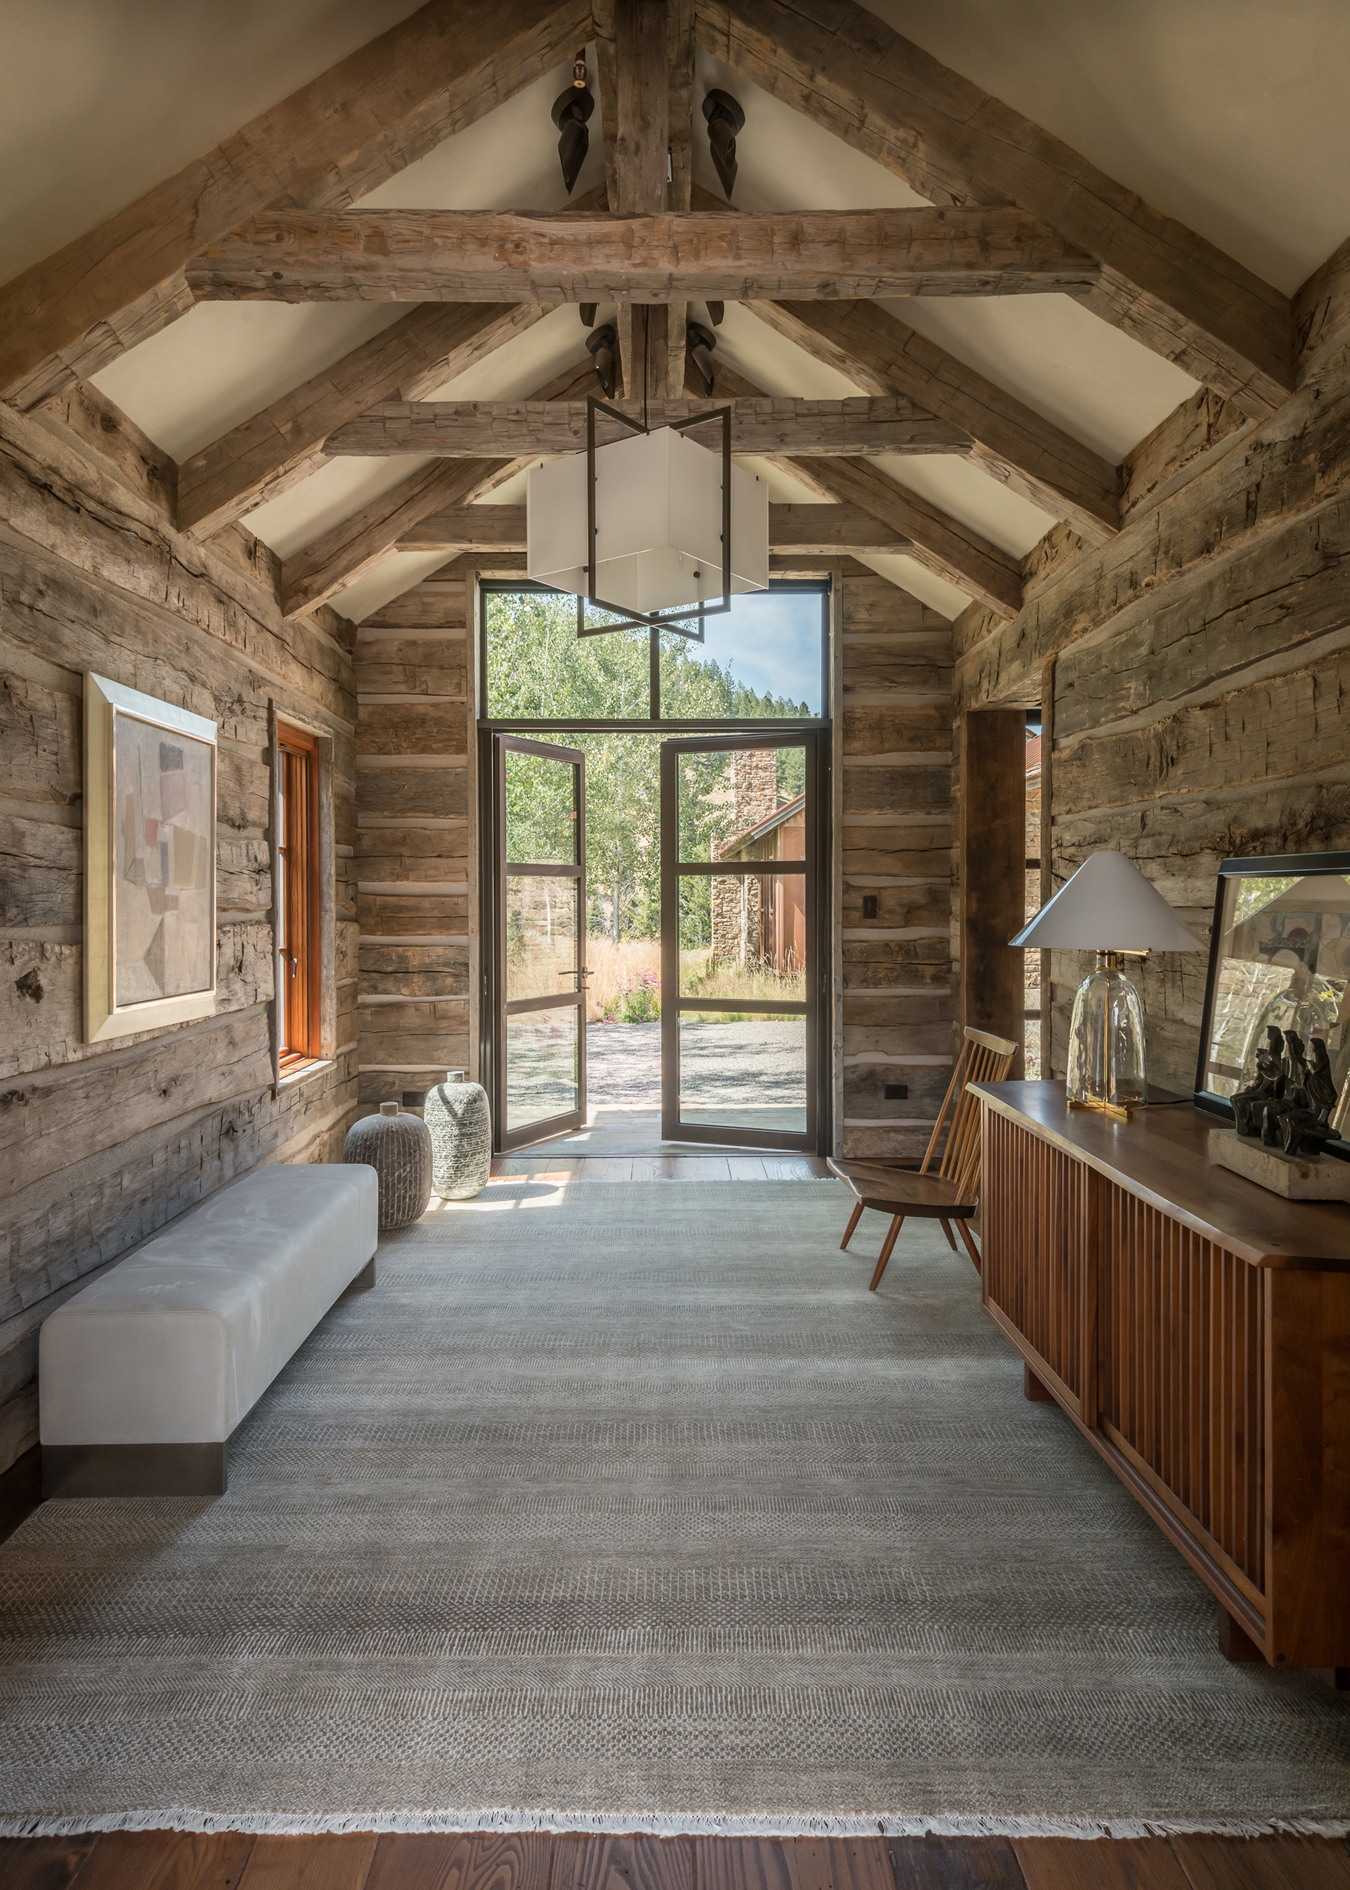 Using reclaimed materials as in these hewn trusses, JLF Architects partners with Big-D Signature in a design-build philosophy that produces timeless, custom homes (photo by Audrey Hall).